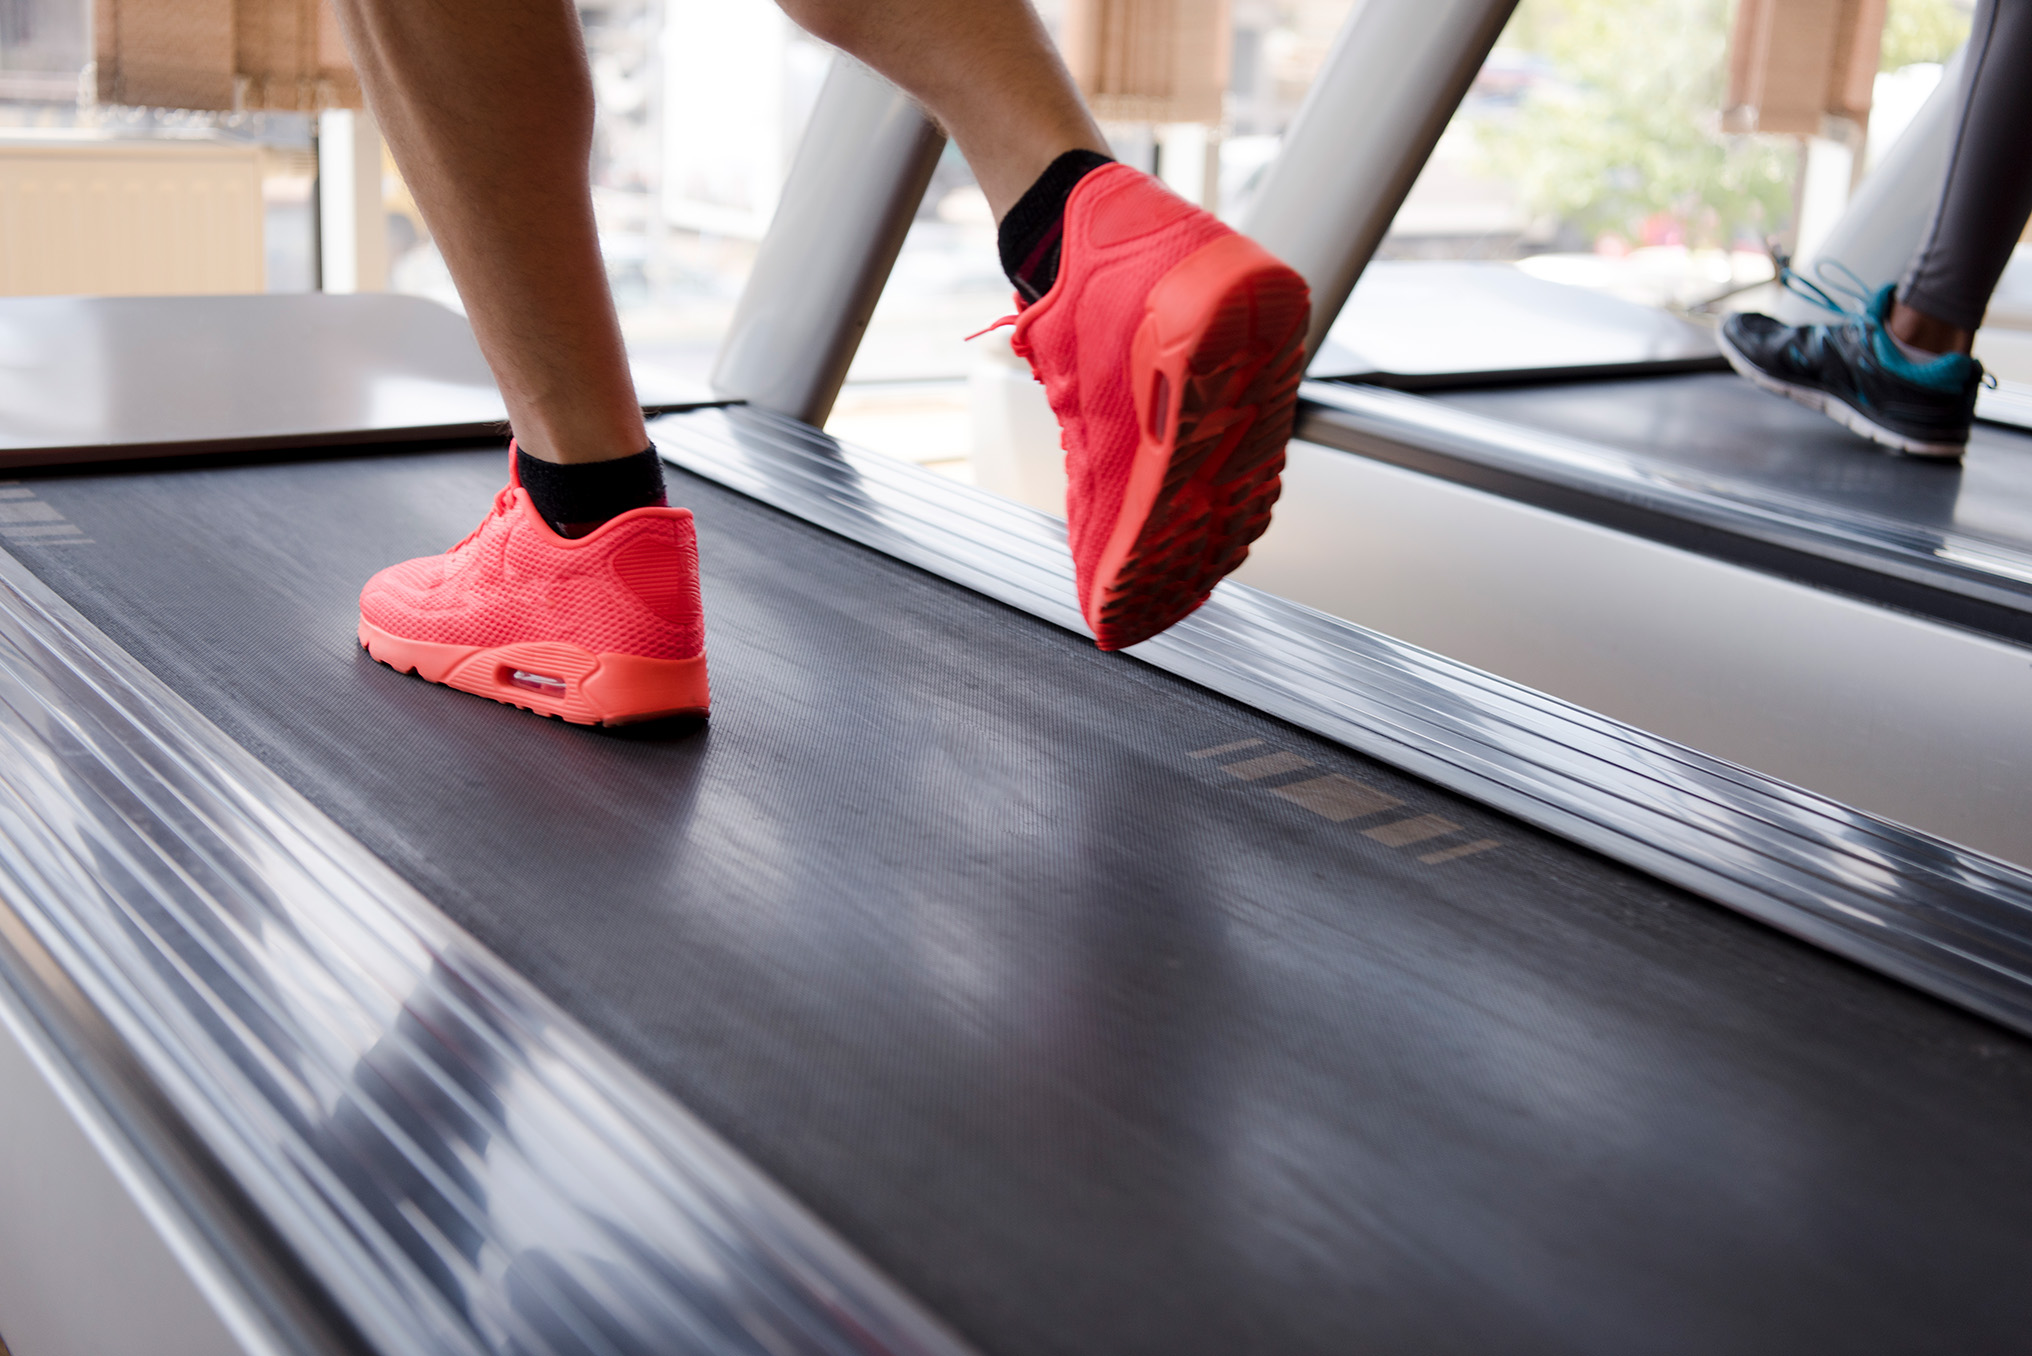 Man's legs in red shoes running on treadmill at gym.